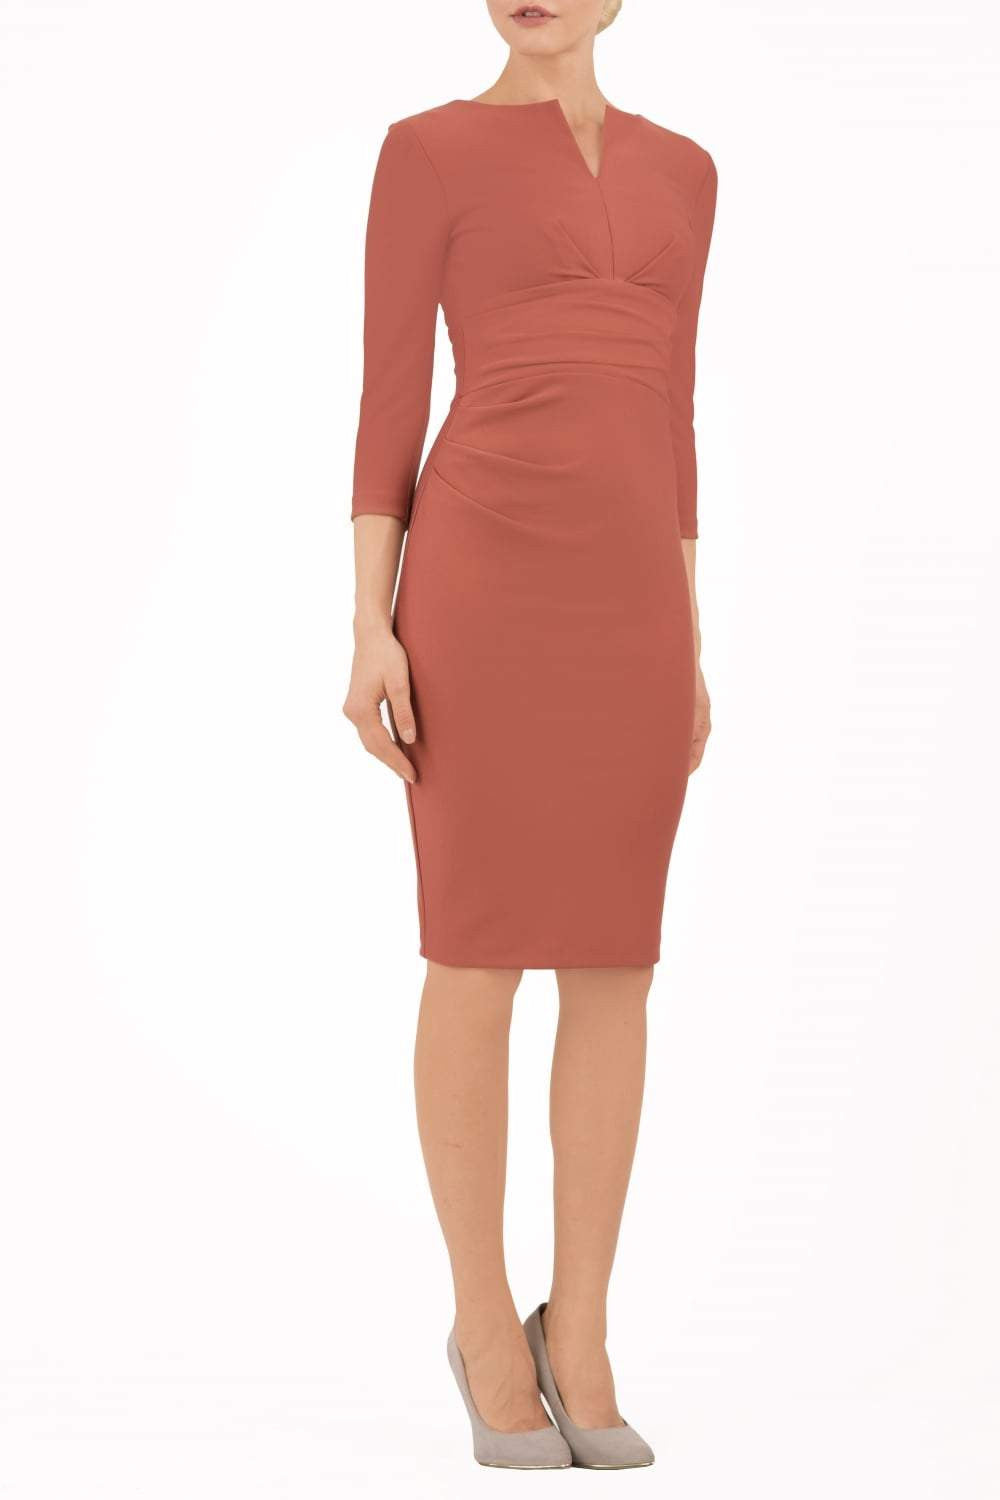 model wearing diva catwalk donna pencil dress in marsala brown colour with wide band and sleeves and rounded neckline with low split in front